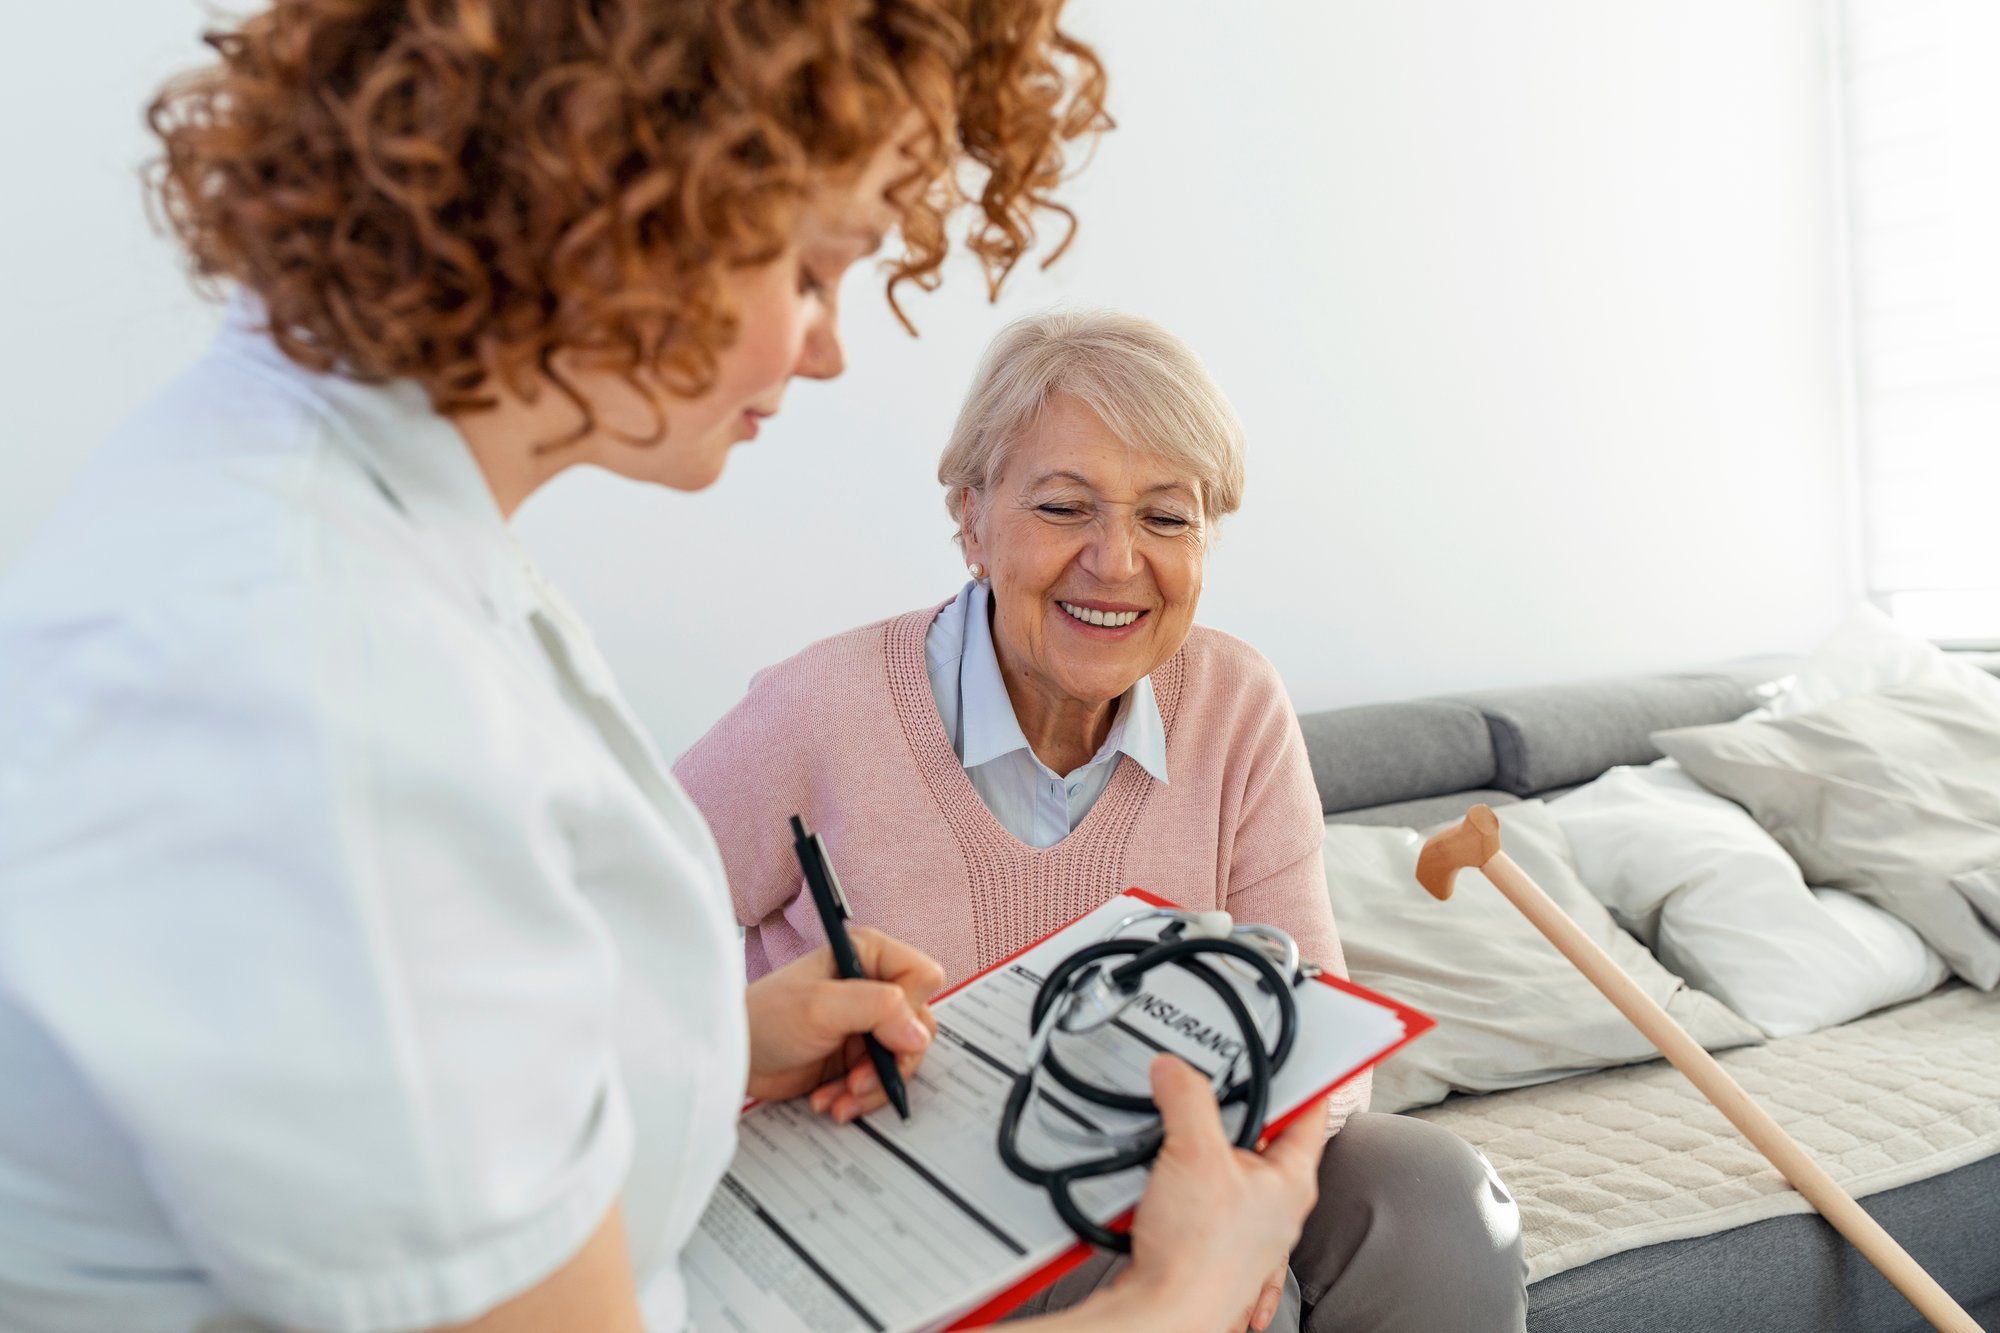 senior-woman-is-visited-by-her-doctor-caregiver-female-doctor-nurse-talking-with-senior-patient-medicine-age-health-care-home-care-concept-senior-woman-with-her-caregiver-home